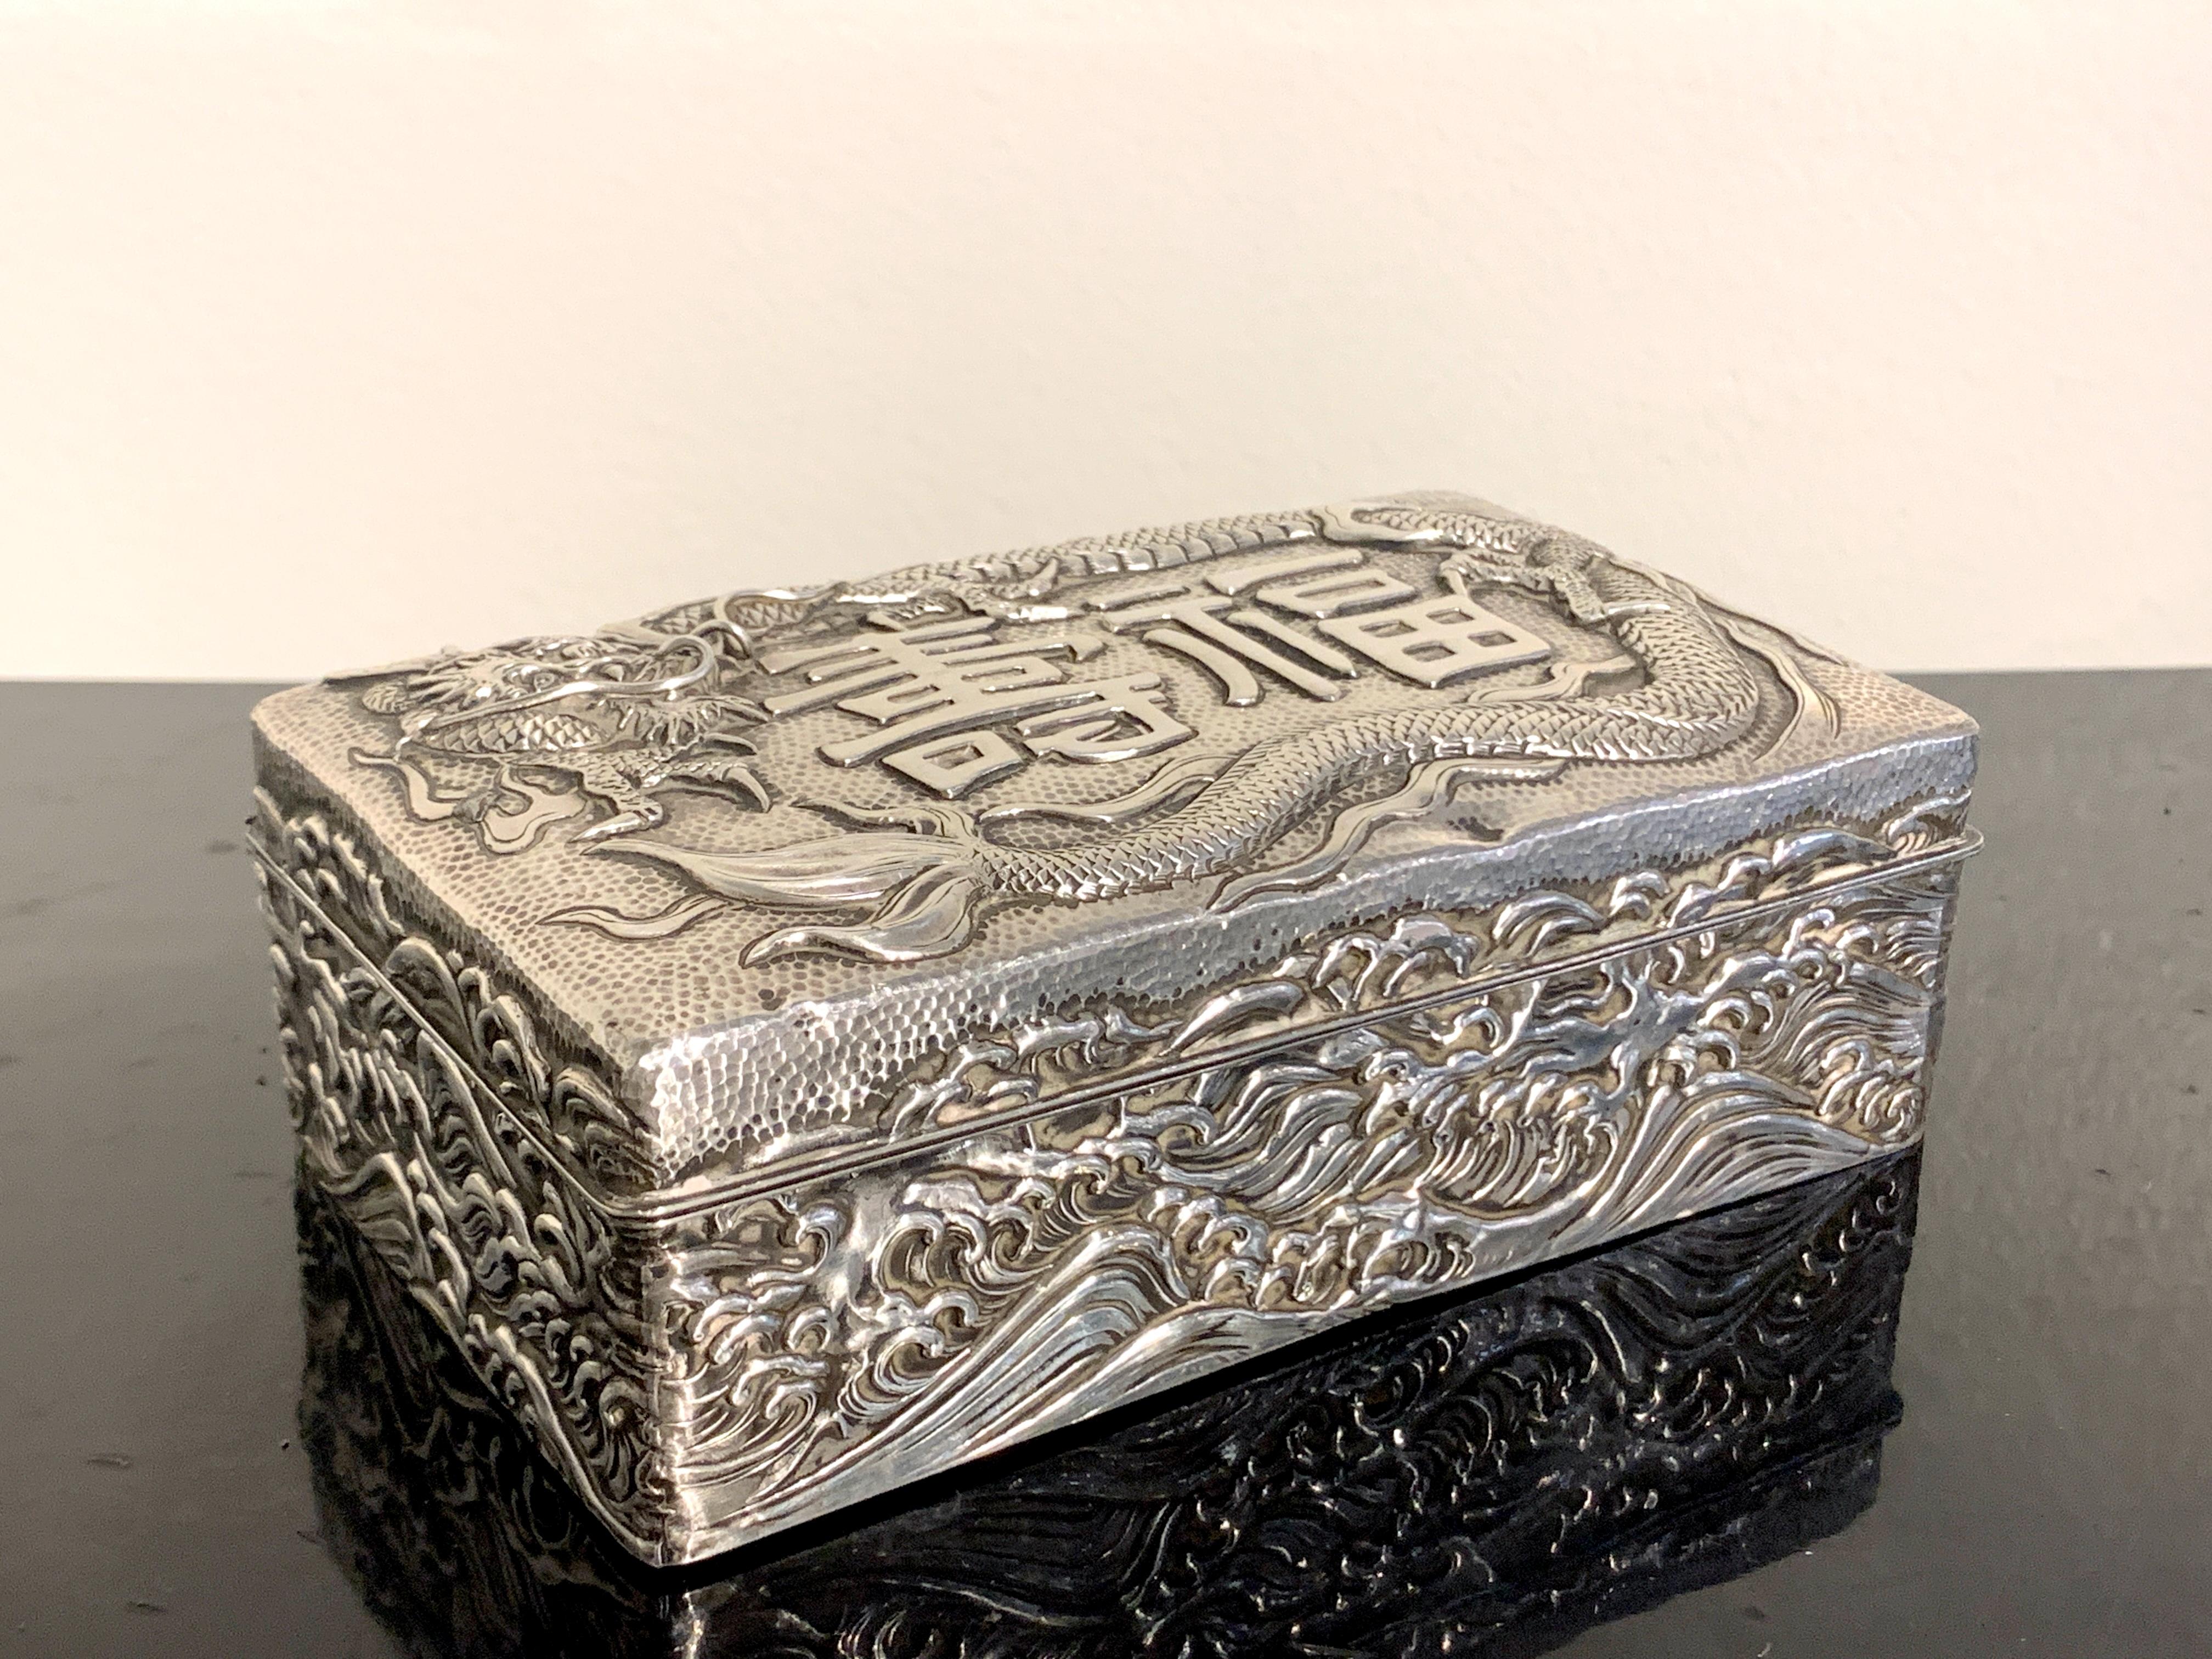 A Japanese hardwood box clad in repoussé silver with a design of the Japanese characters 